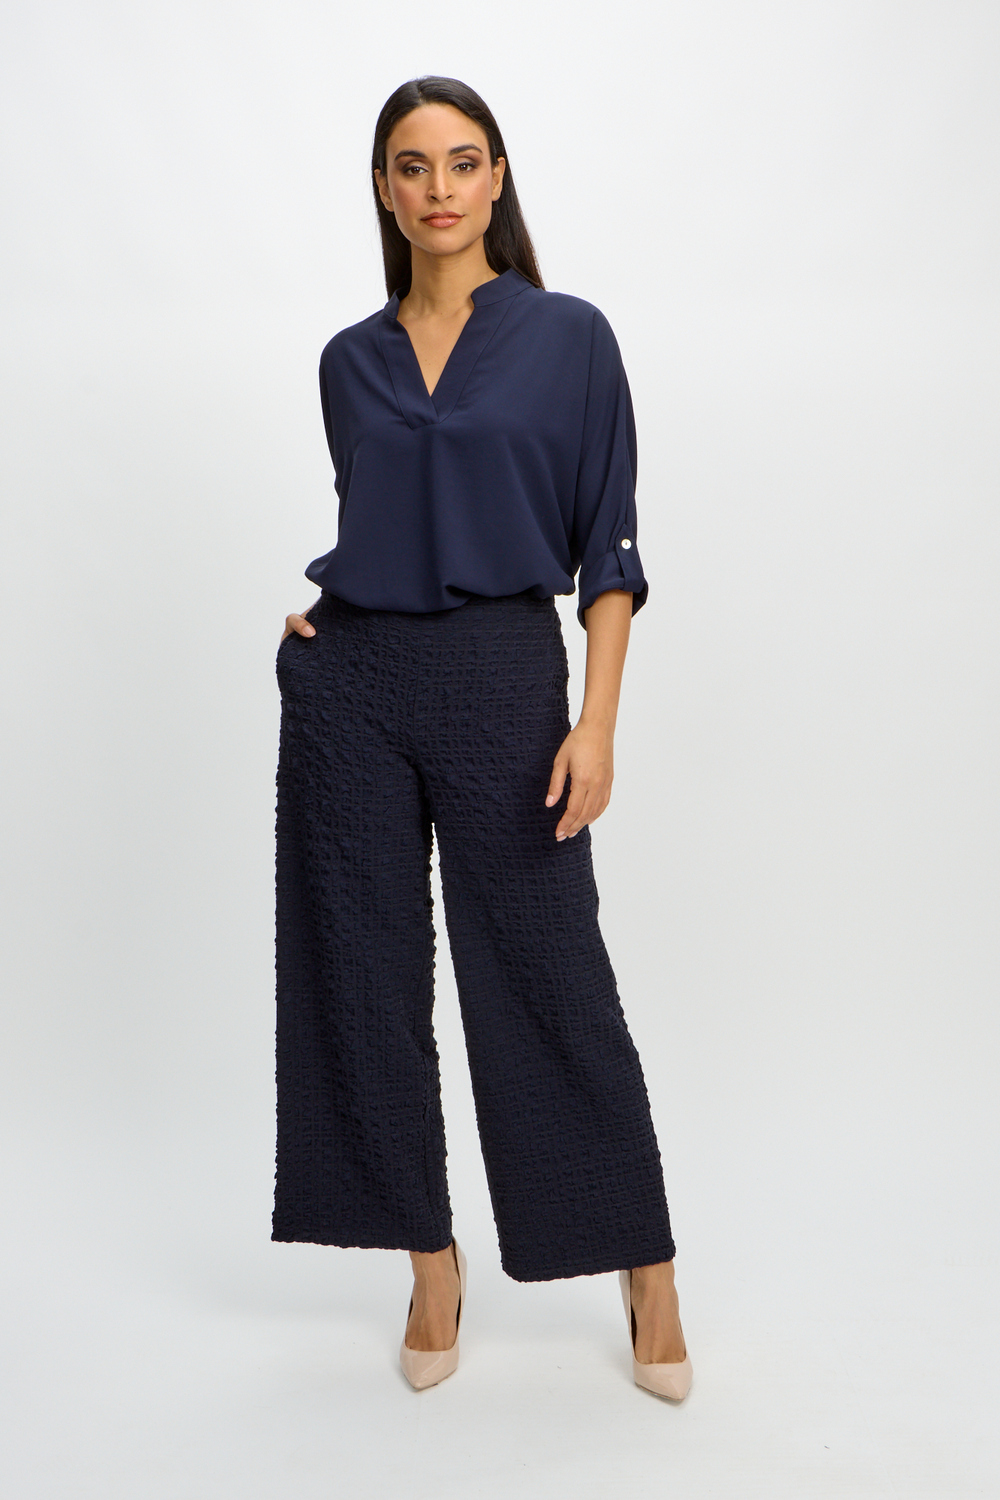 Textured & Checkered Wide Leg Pants Style 241187. Midnight Blue